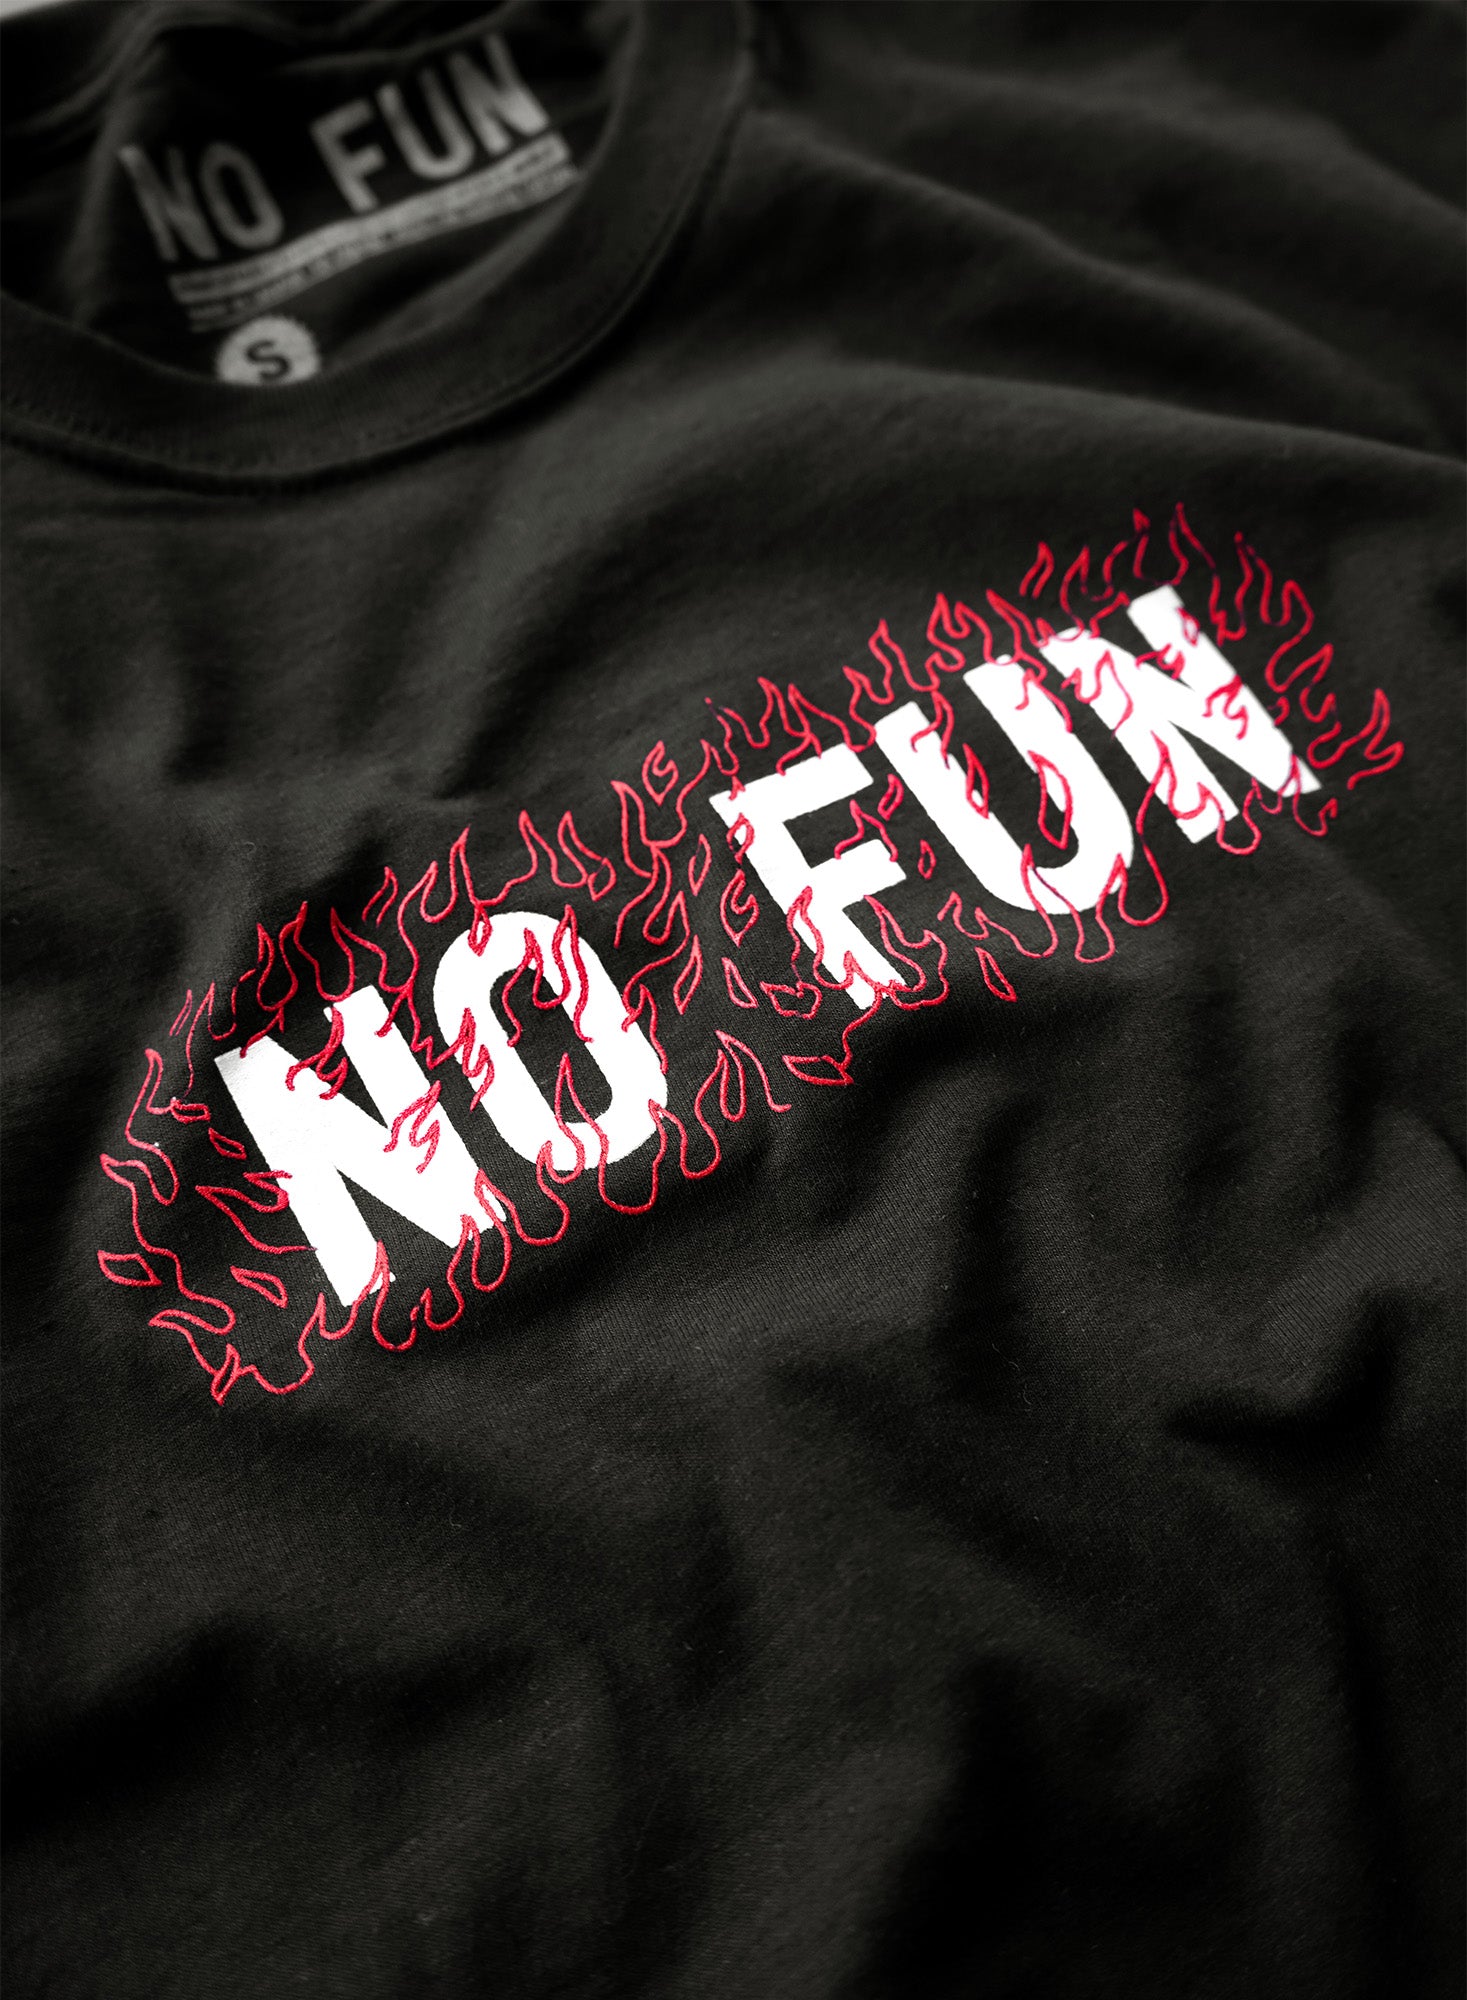 Detail photo of "No Fun®" "Fire" T-shirt.  The t-shirt is black, and features a white "No Fun®" logo surrounded by red linework flames. The graphic is in the center, on the front of the t-shirt.